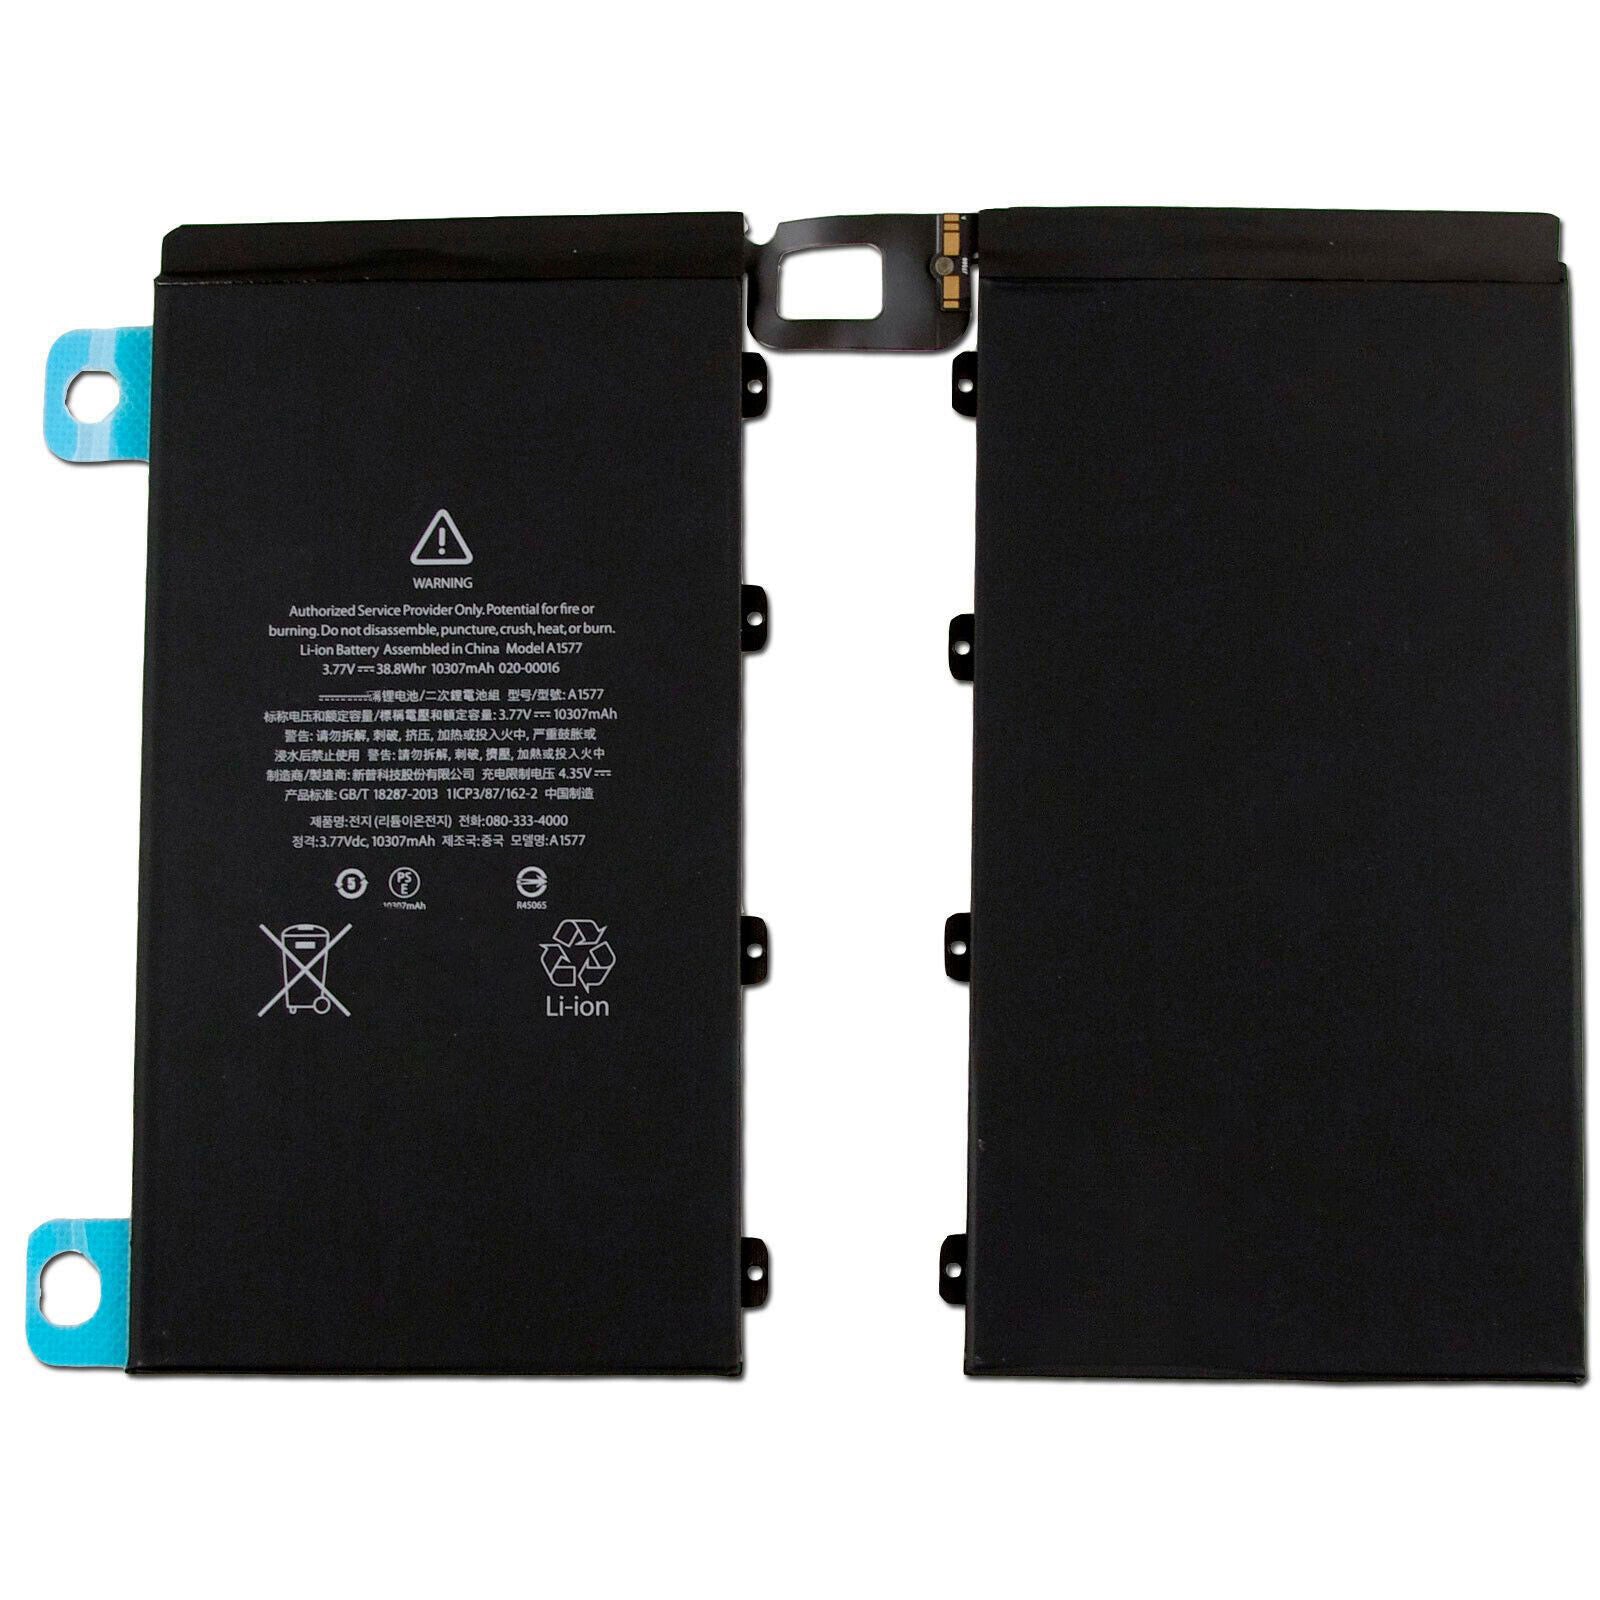 Replacement Battery For Apple iPad Pro 12.9" 2015 - A1577